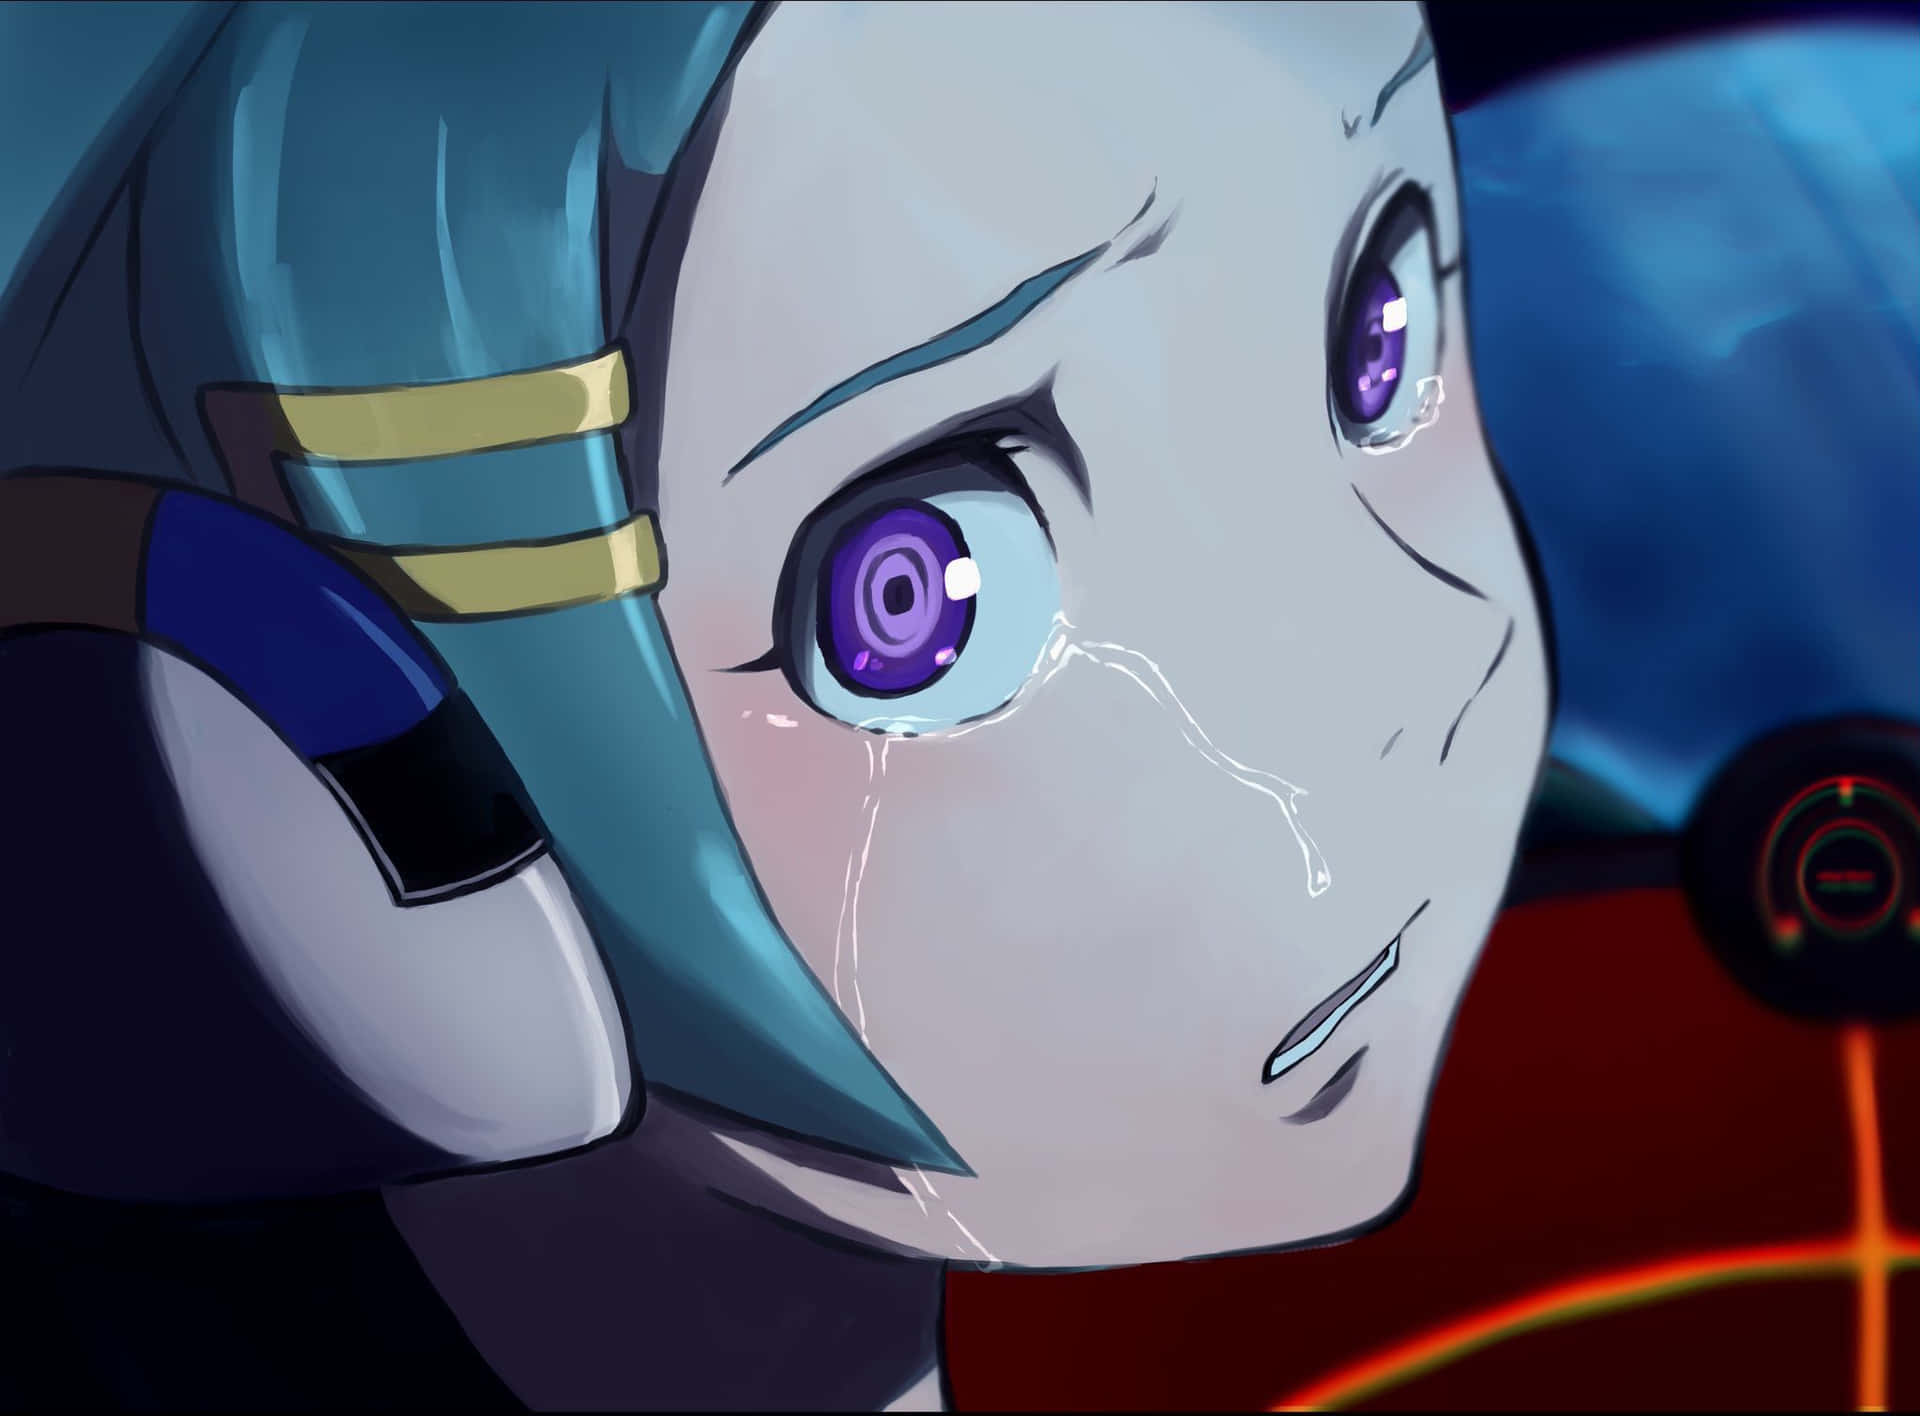 A story of friendship, love and adventure - the breathtaking world of Eureka Seven revealed